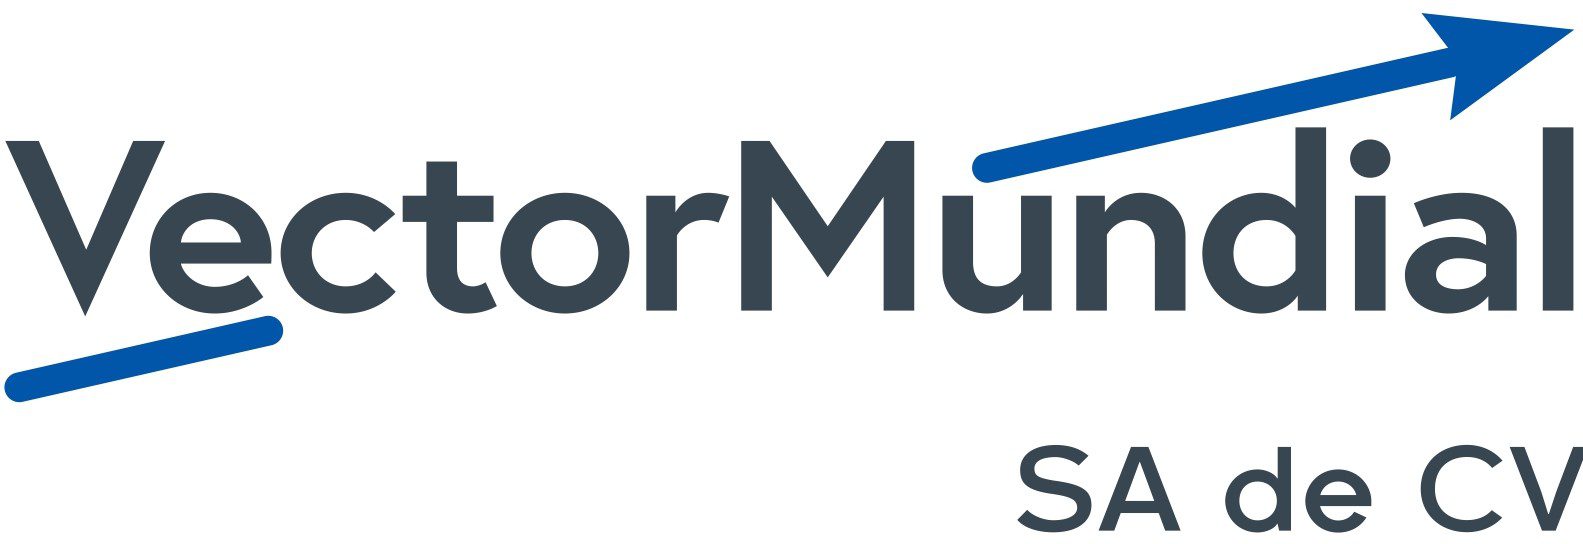 A logo of normusic and a sign for the company.